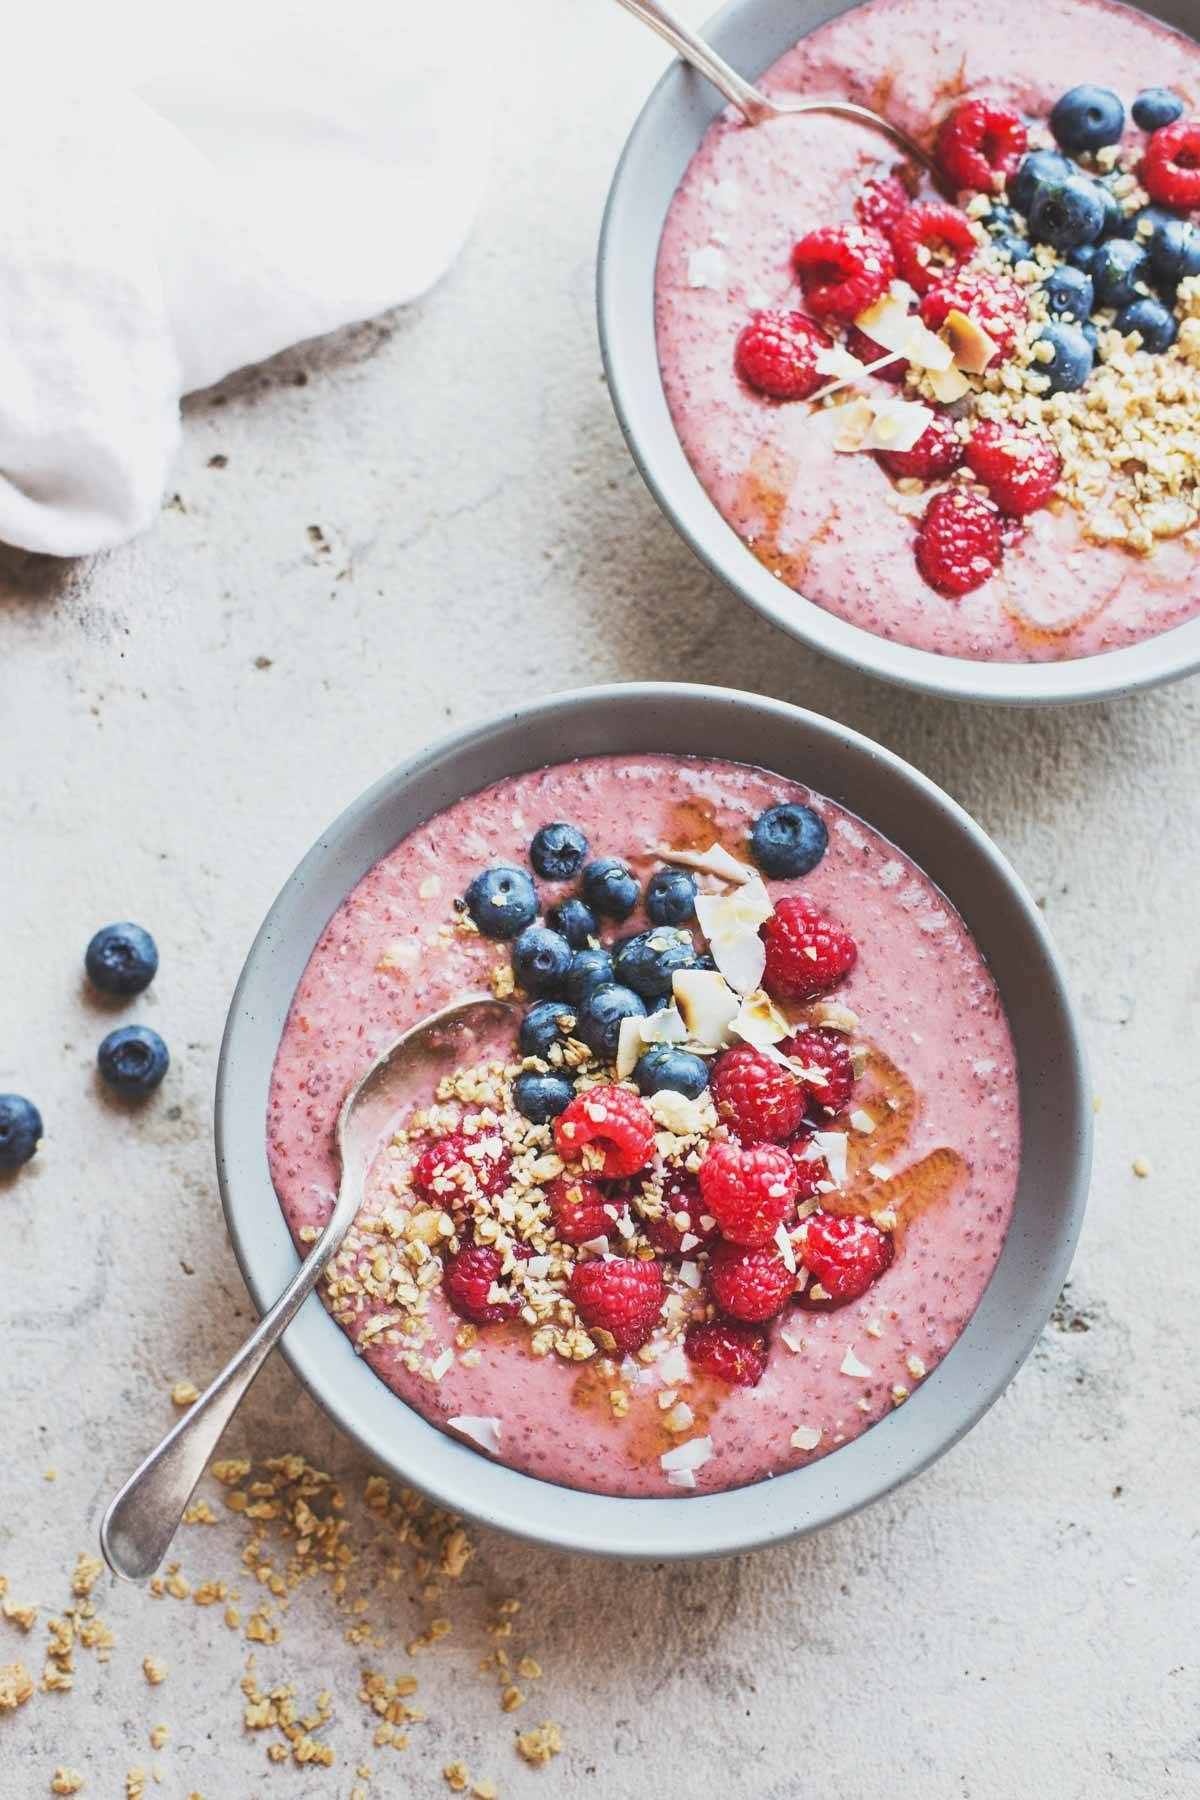 Two smoothie bowls with berries.